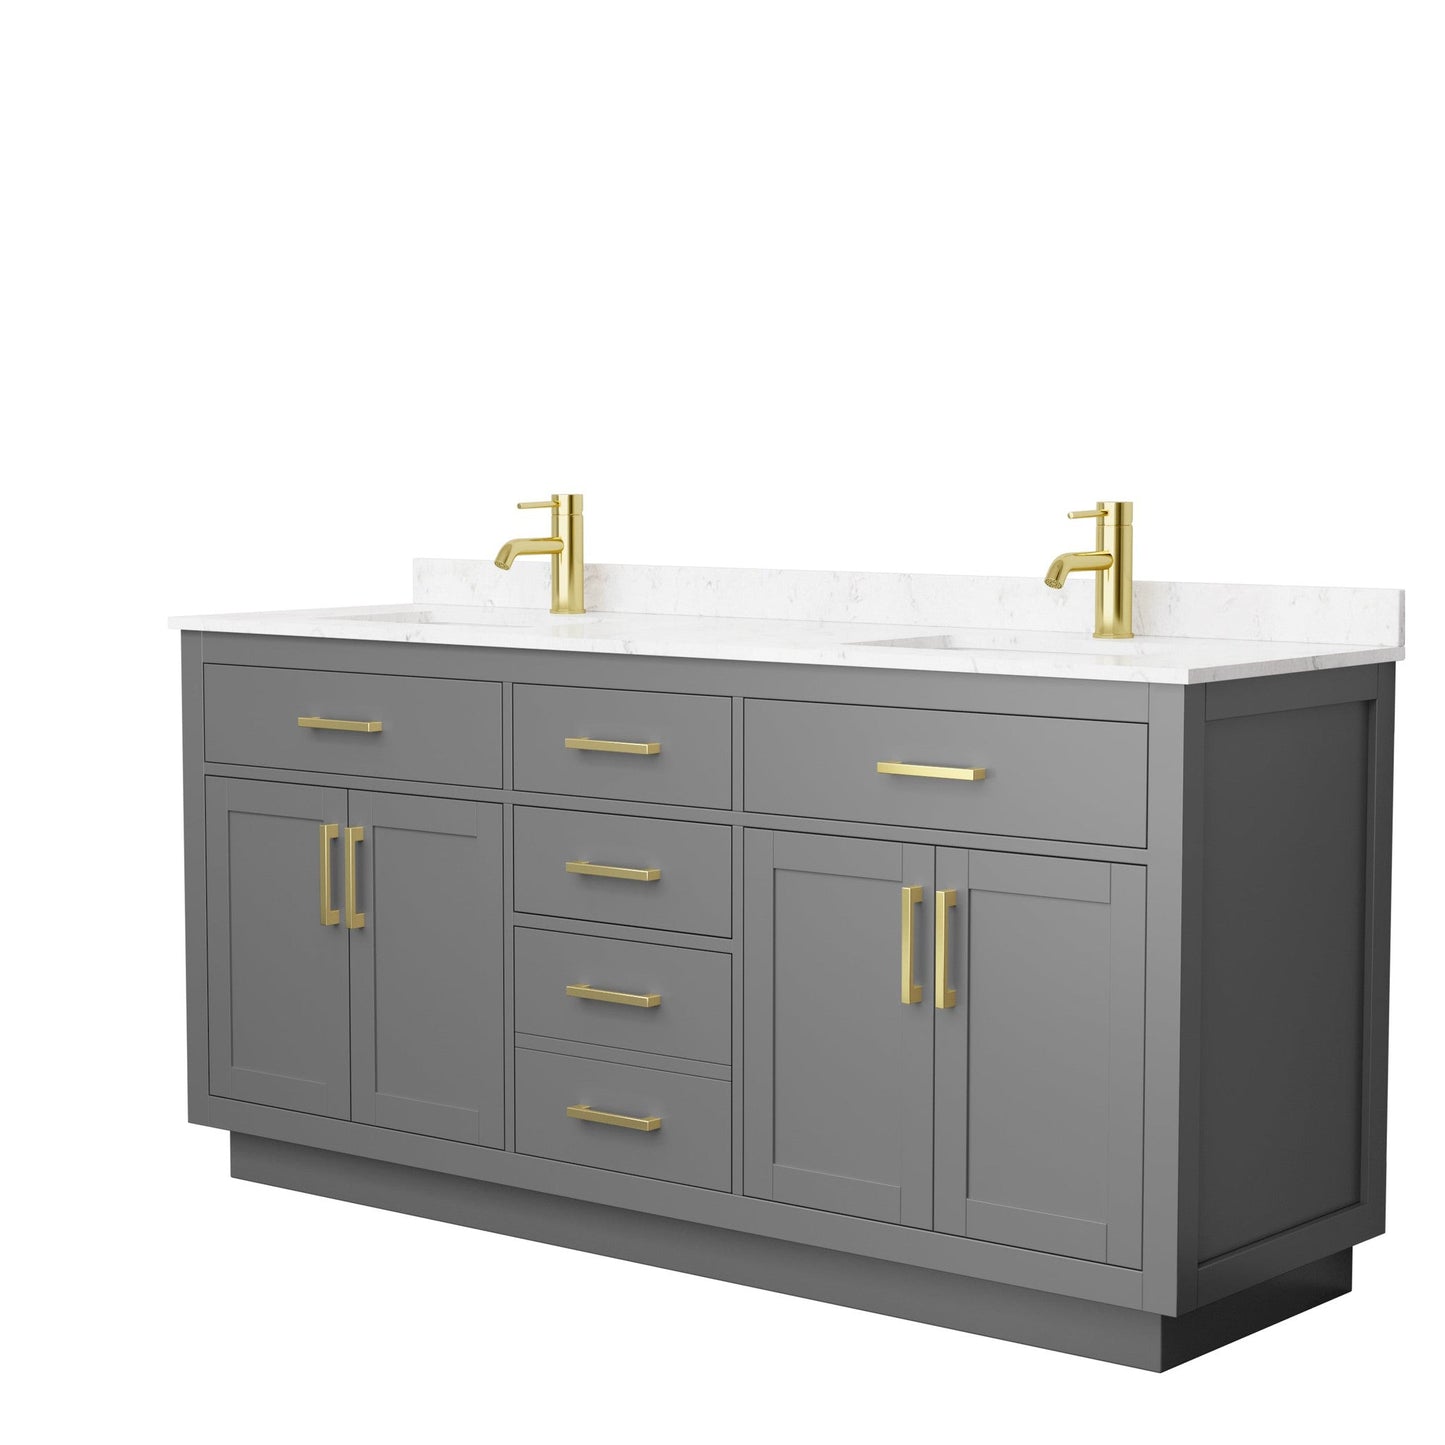 Beckett 72" Double Bathroom Vanity With Toe Kick in Dark Gray, Carrara Cultured Marble Countertop, Undermount Square Sinks, Brushed Gold Trim